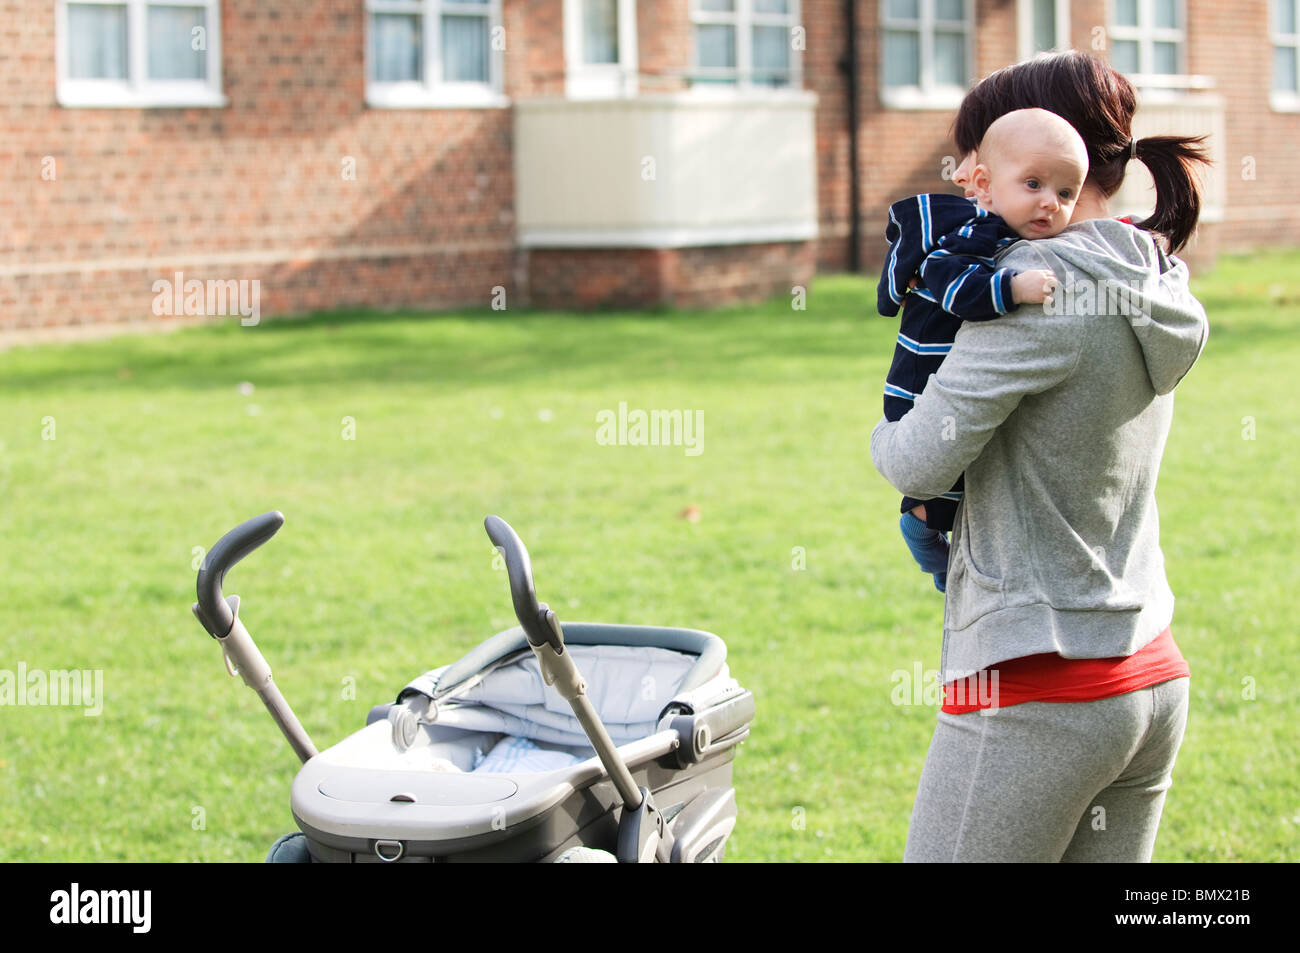 single mother with baby Stock Photo